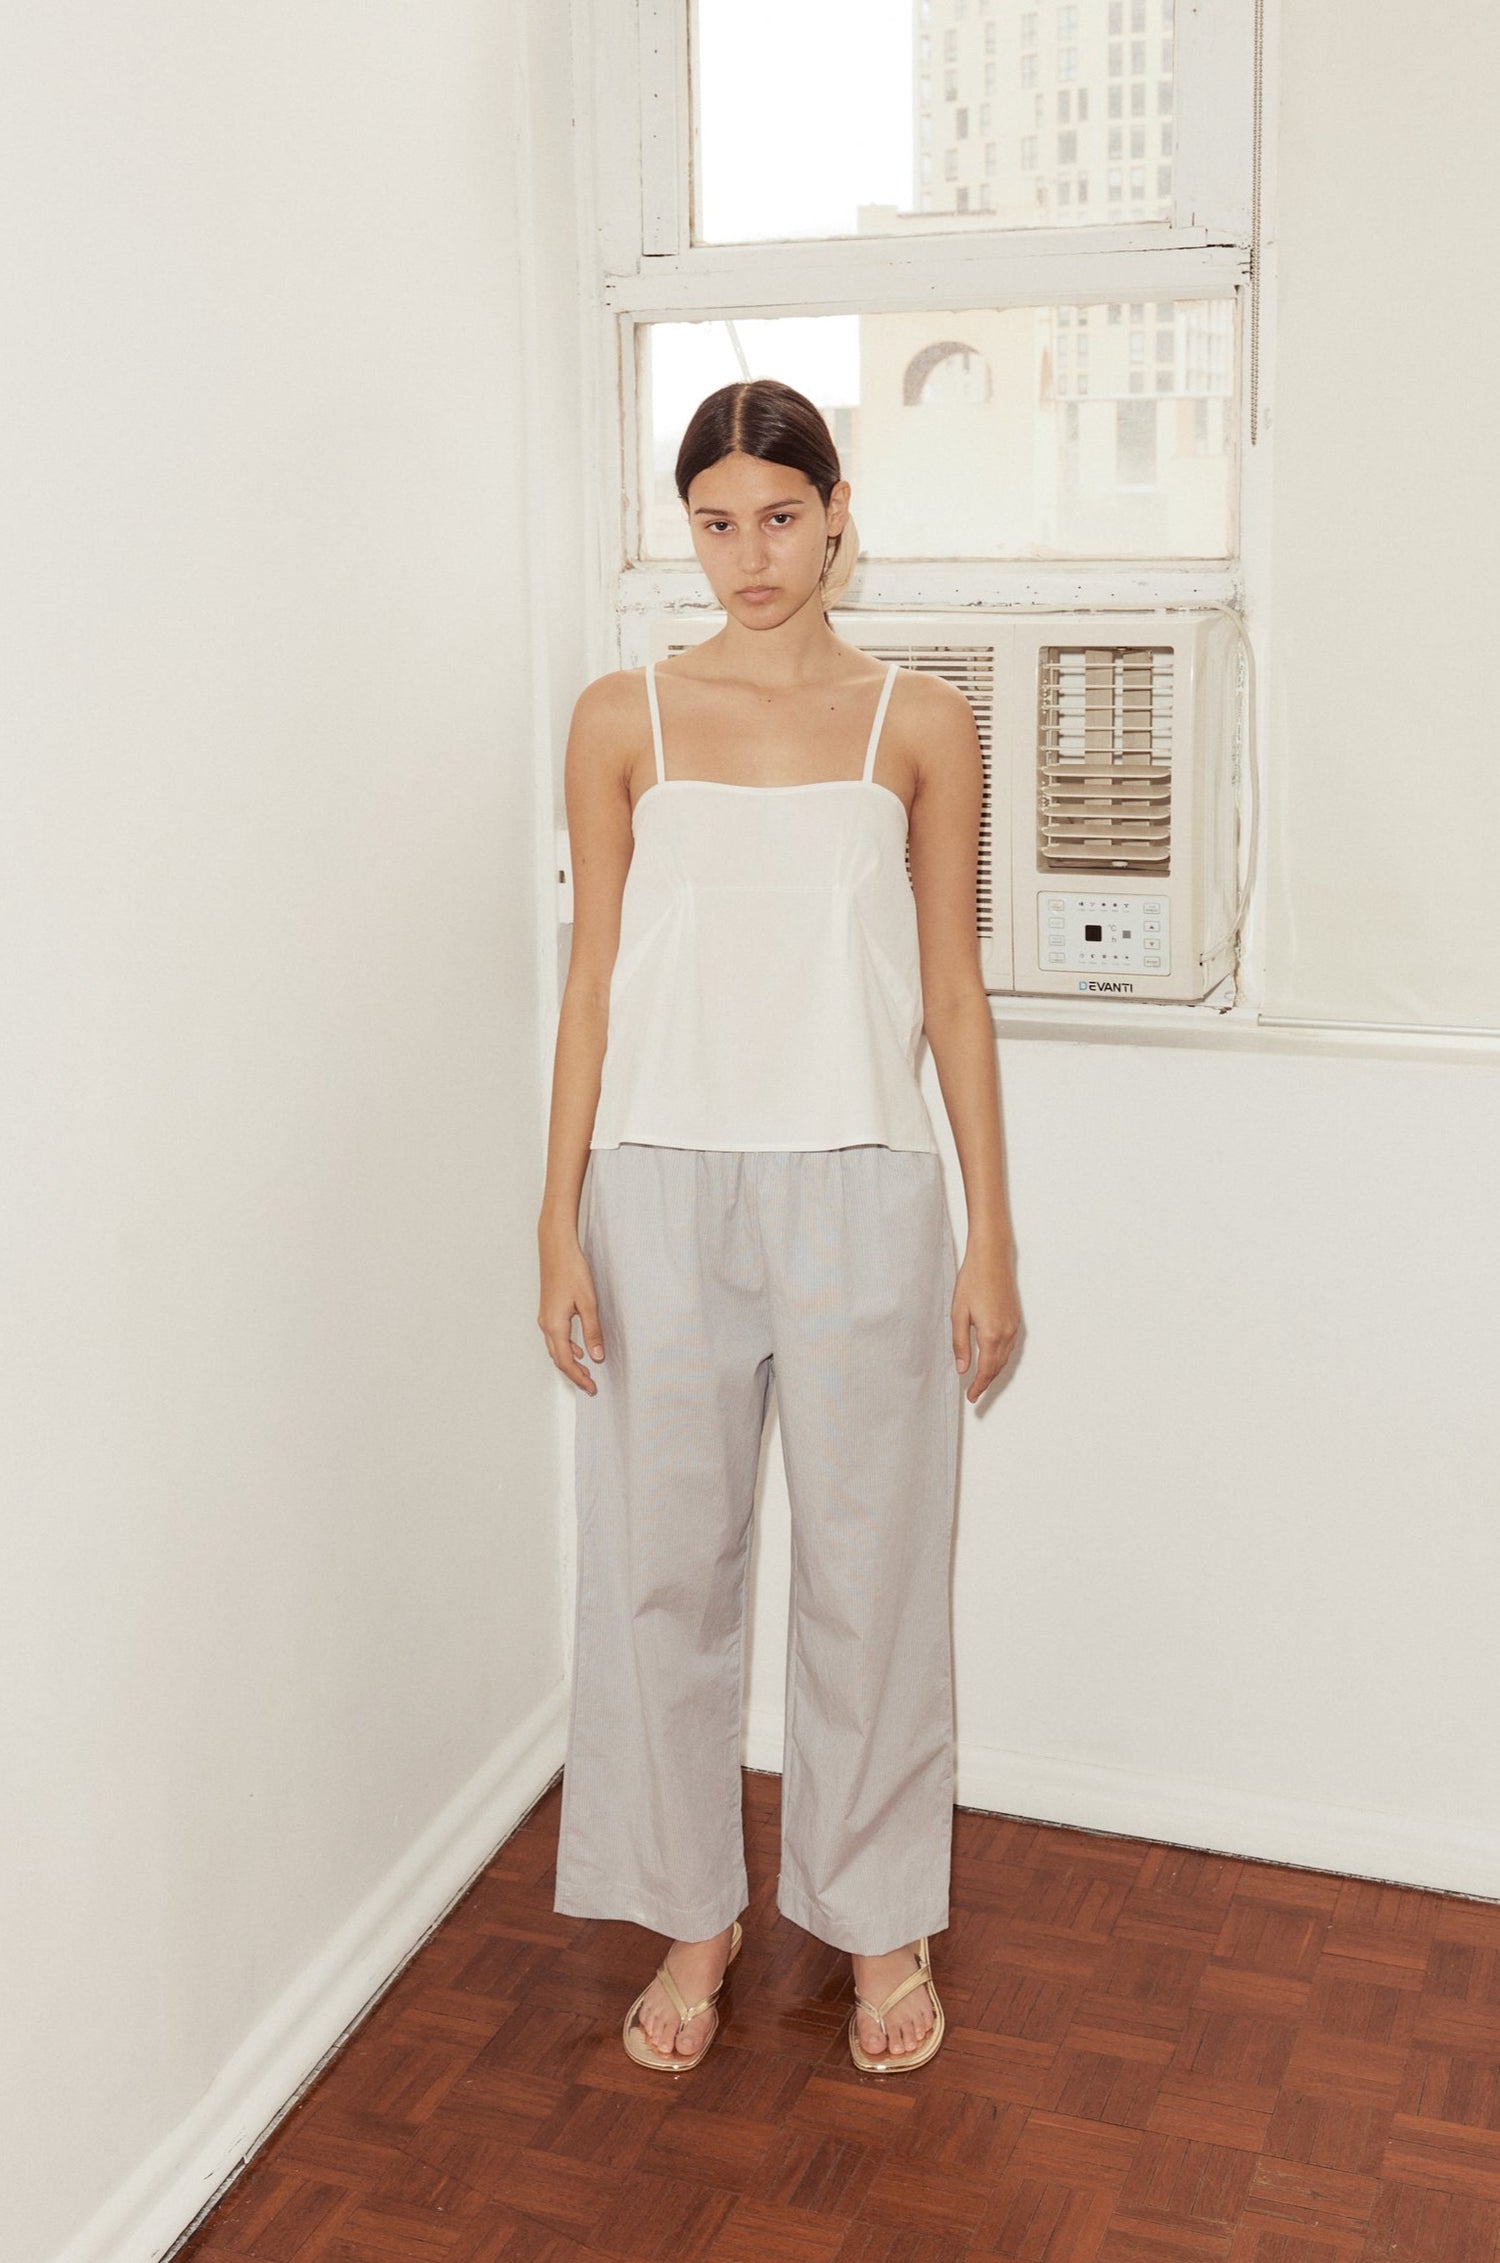 female model wears the Deiji Studios Ease Trouser in Dream Stripe, a soft blue micro stripe trouser in organic cotton poplin. Features side pockets, a relaxed leg and soft elastic waist. Styled with the Deiji Studios Pleat Top in white.